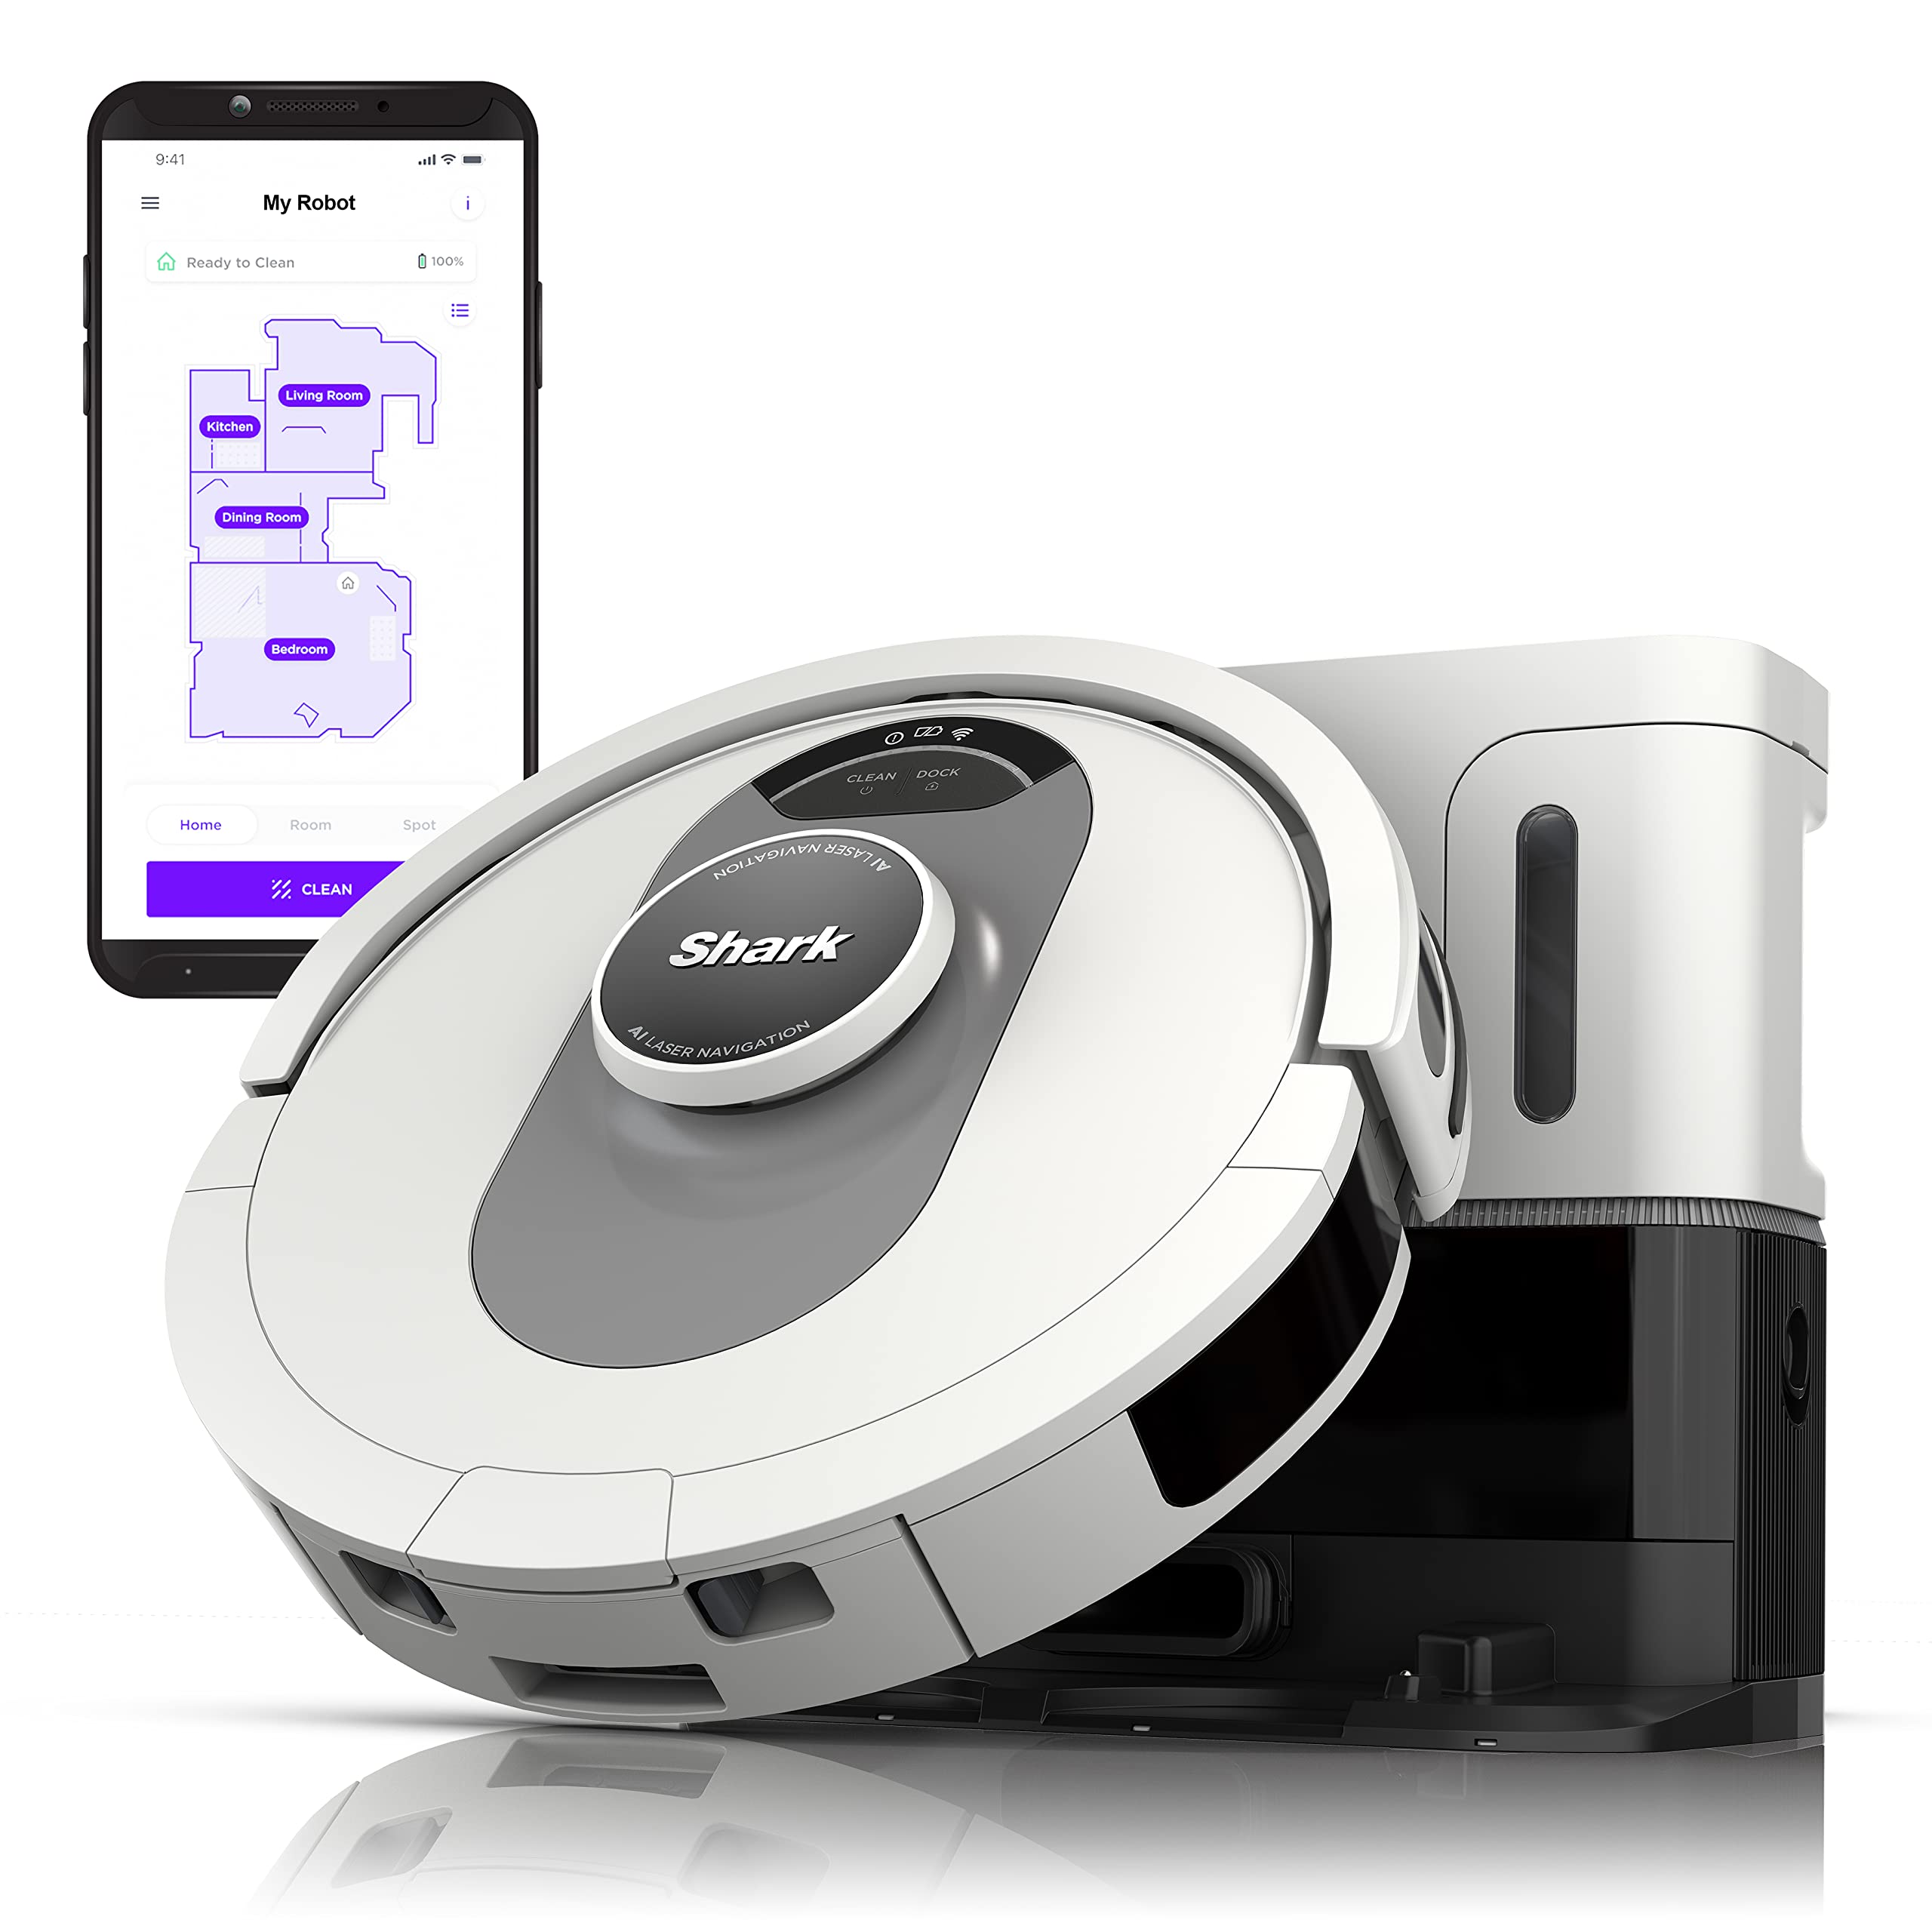 Shark AI Ultra Voice Control Robot Vacuum with Matrix Clean Navigation, Home Mapping, 60-Day Capacity, Self-Empty Base for Homes with Pets (Silver/Black) $299